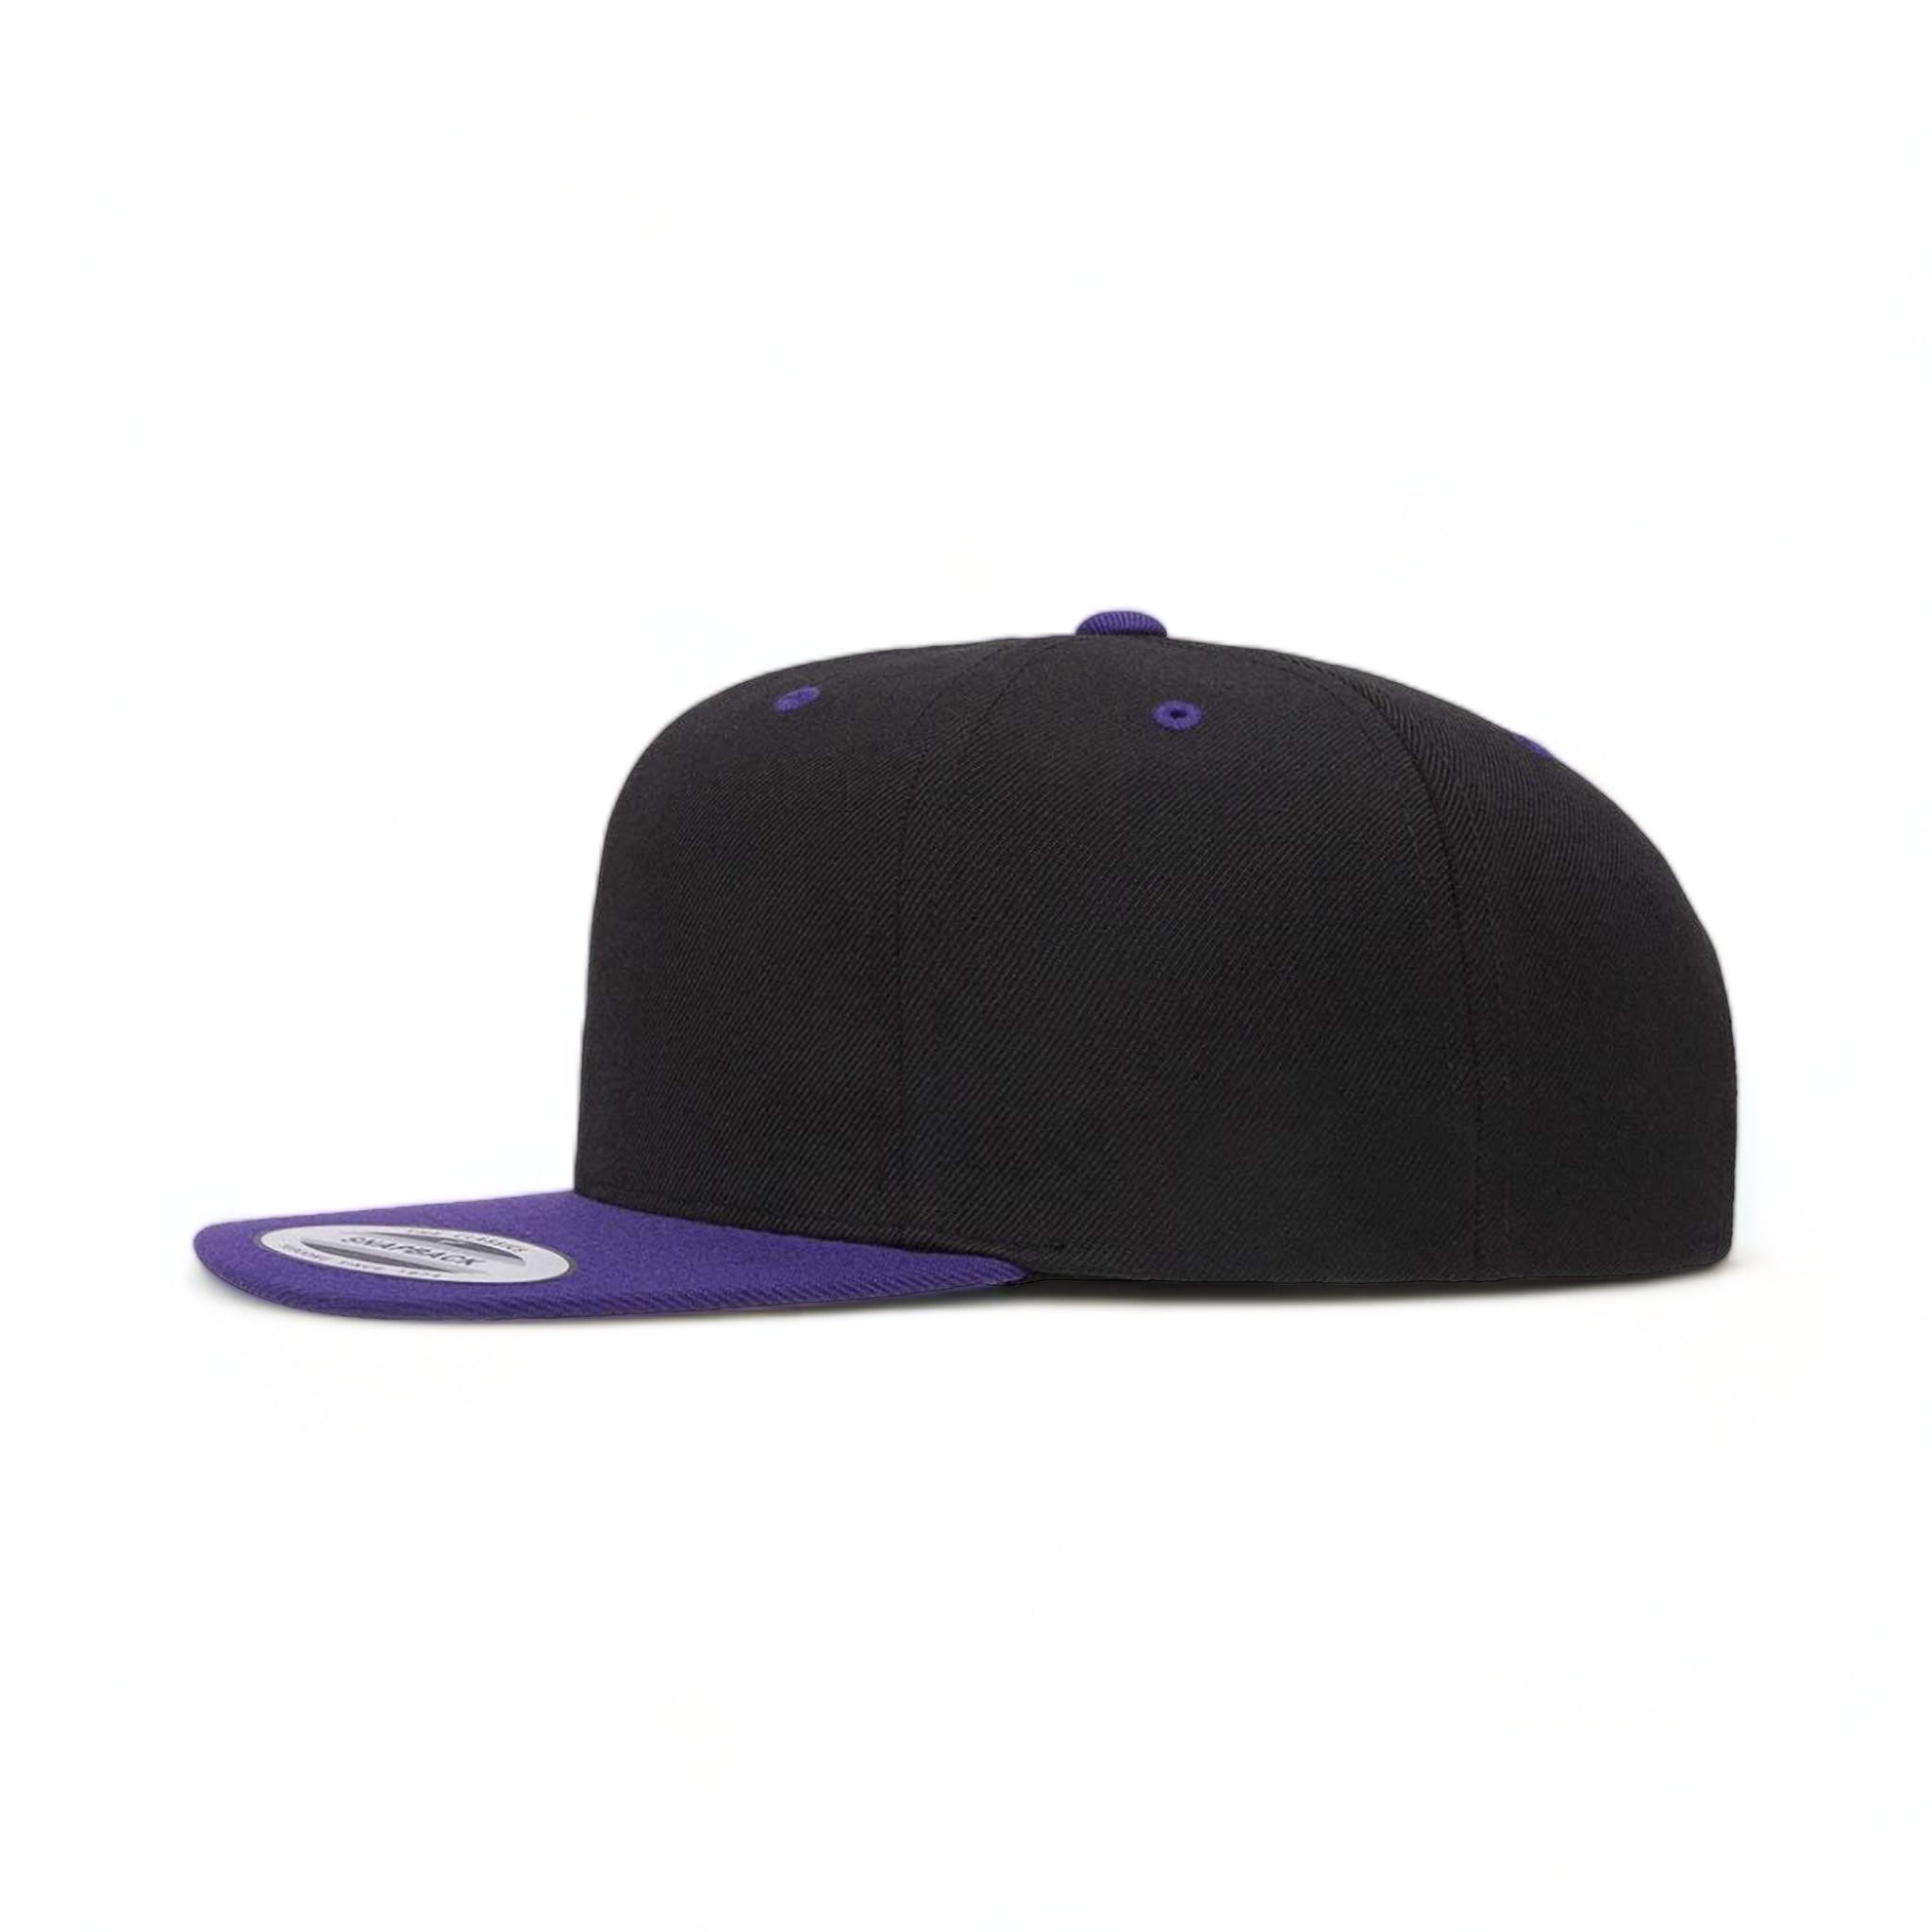 Side view of YP Classics 6089M custom hat in black and purple